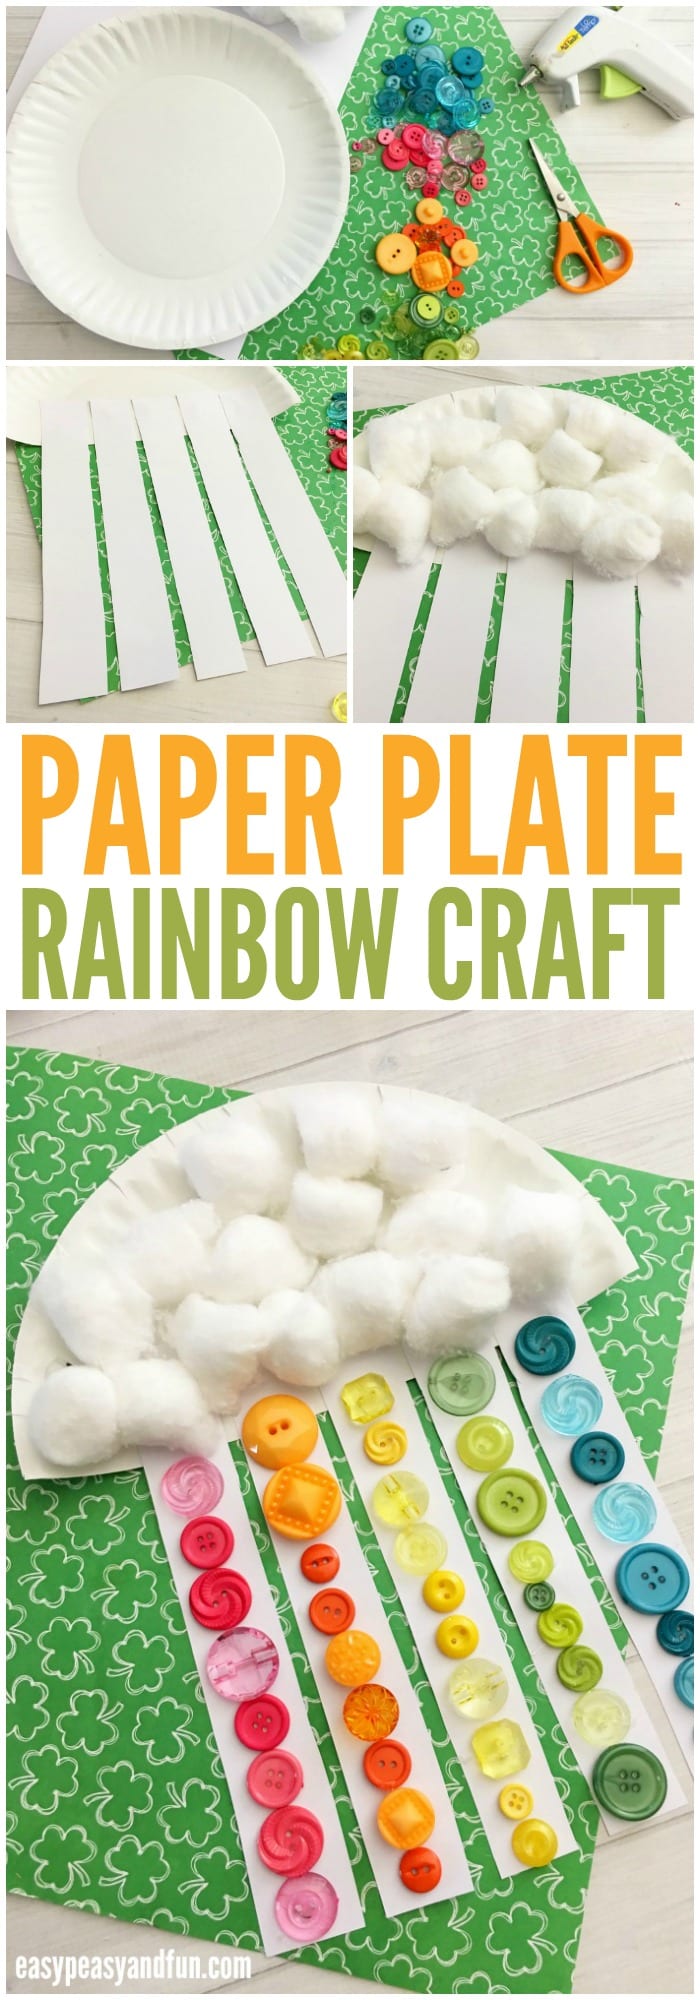 Adorable Paper Plate Rainbow Craft for Kids